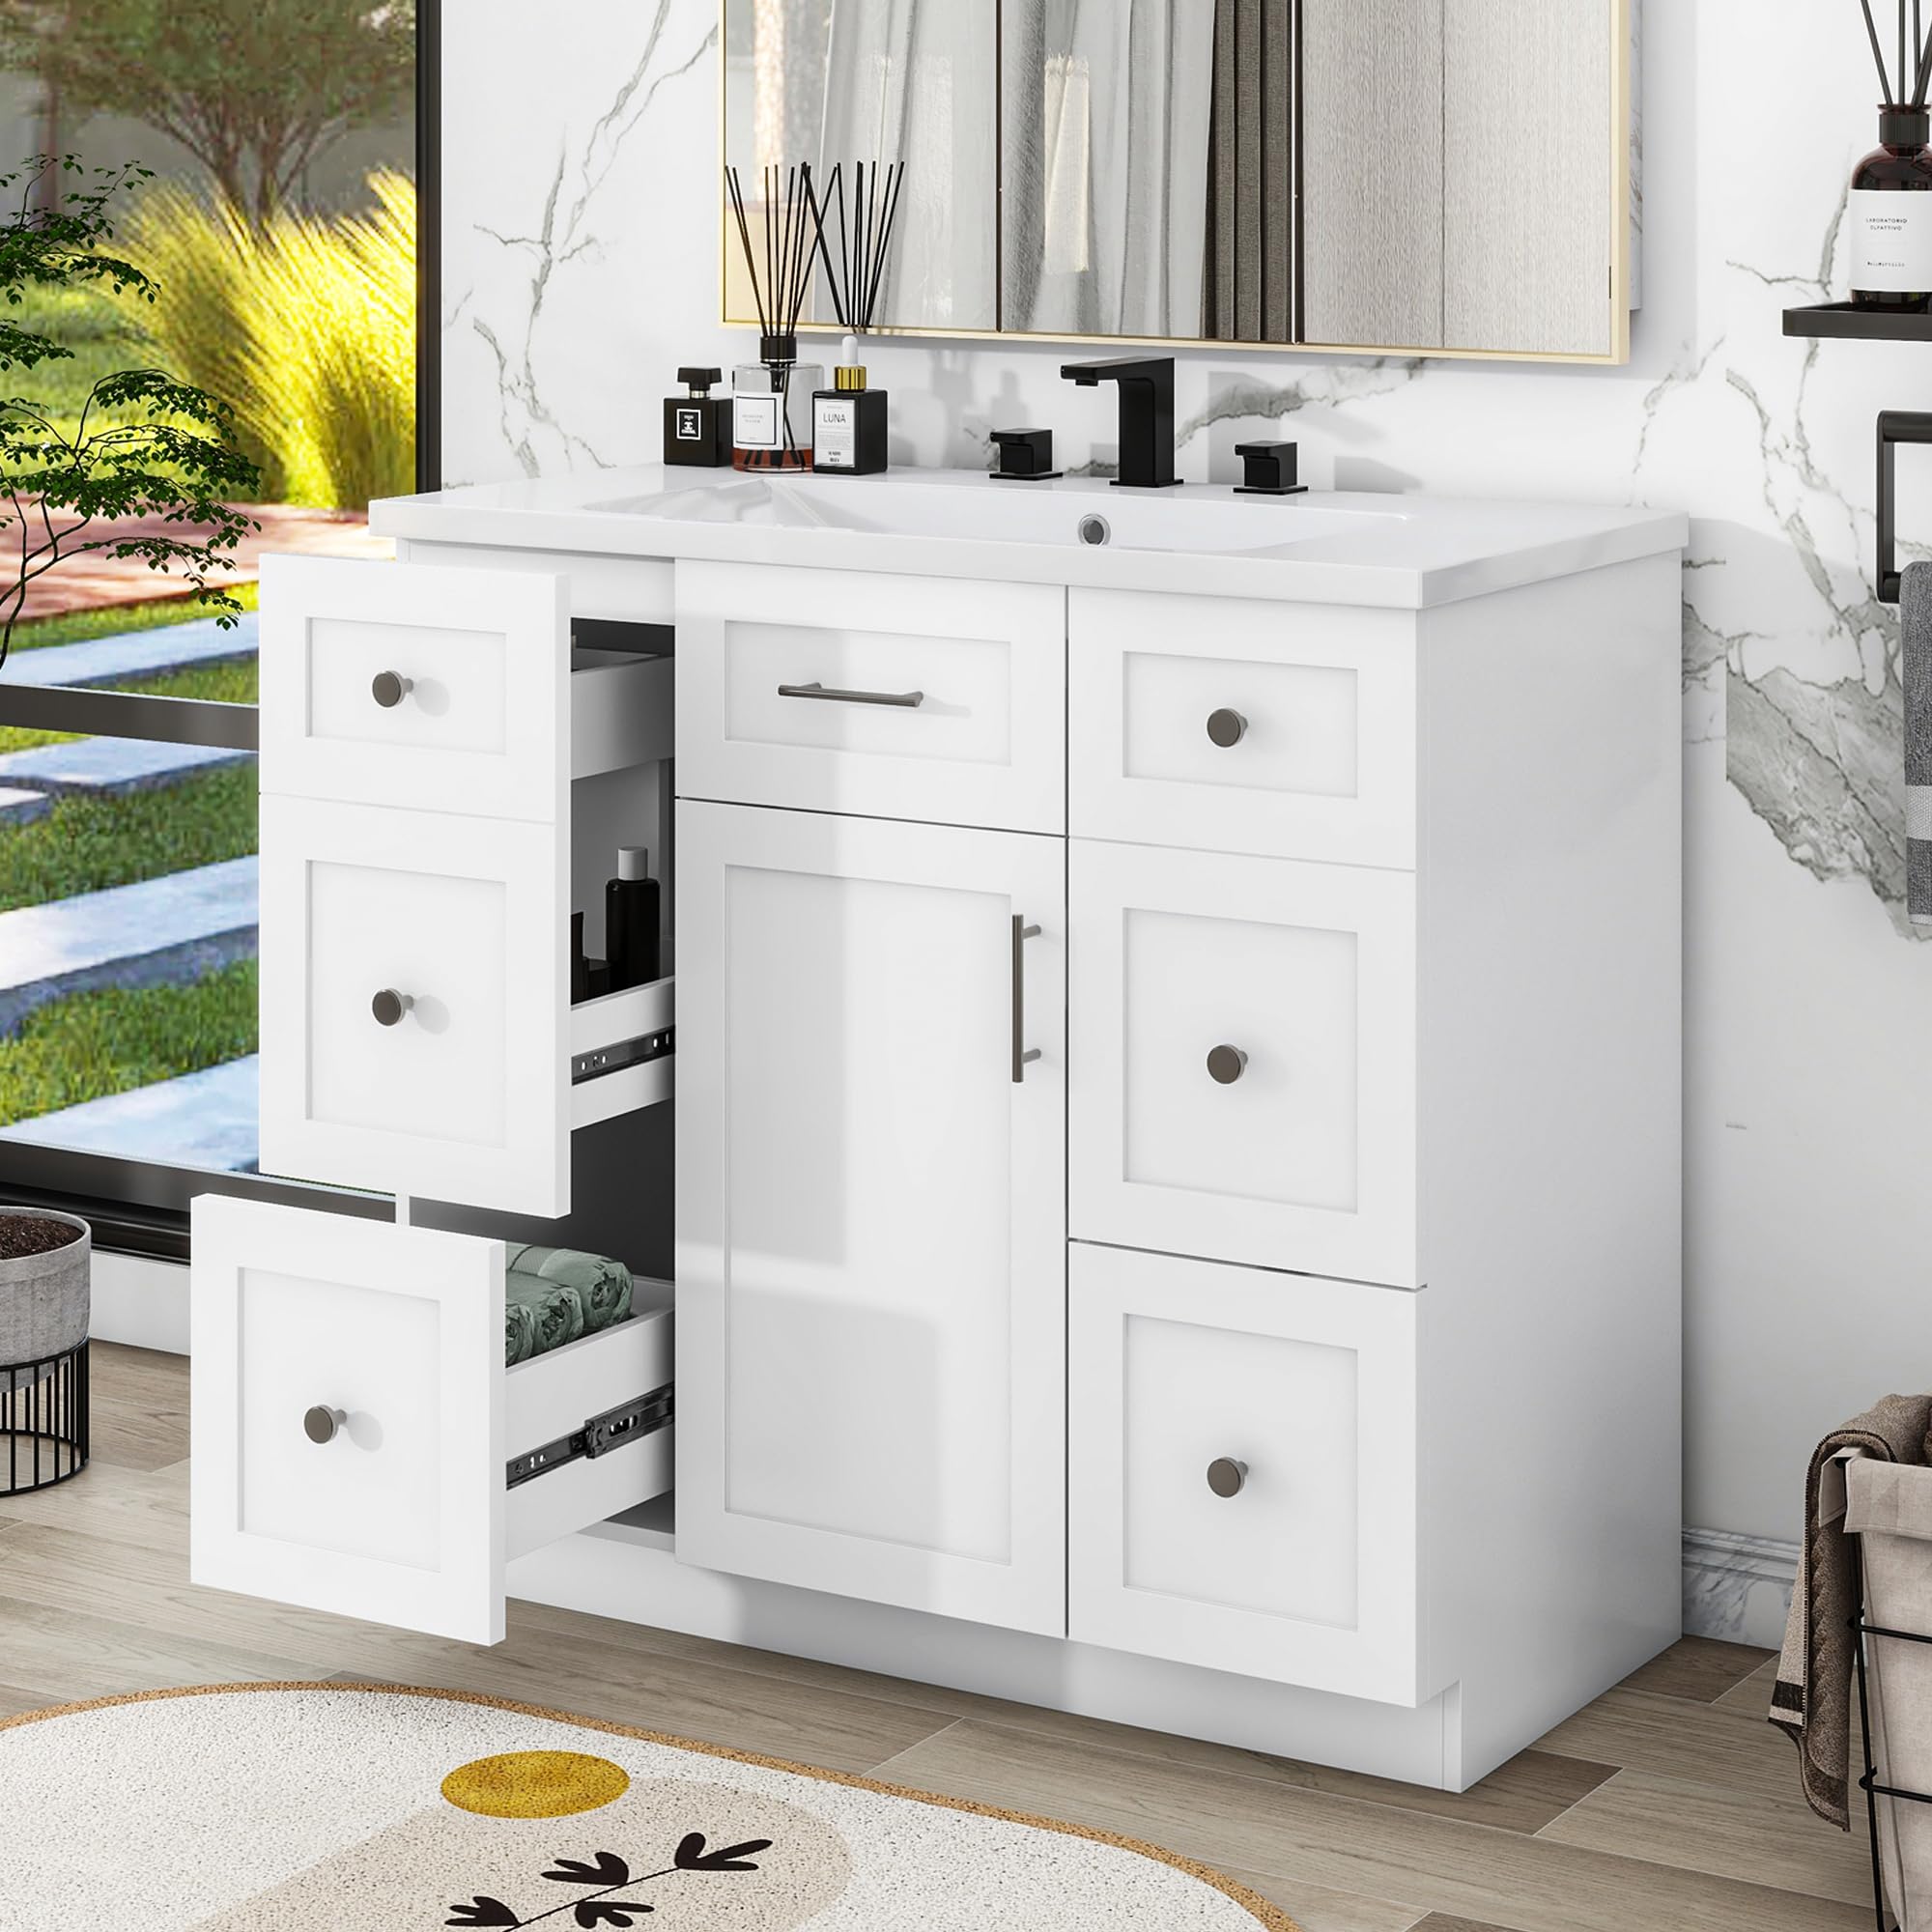 Lostcat 36inch Modern Bathroom Vanity with Sink,Freestanding Bathroom Vanity Cabinet,with 4 Drawers, 1 Soft-Close Door,with Resin Integrated Basin,Easy Assmebly(White)